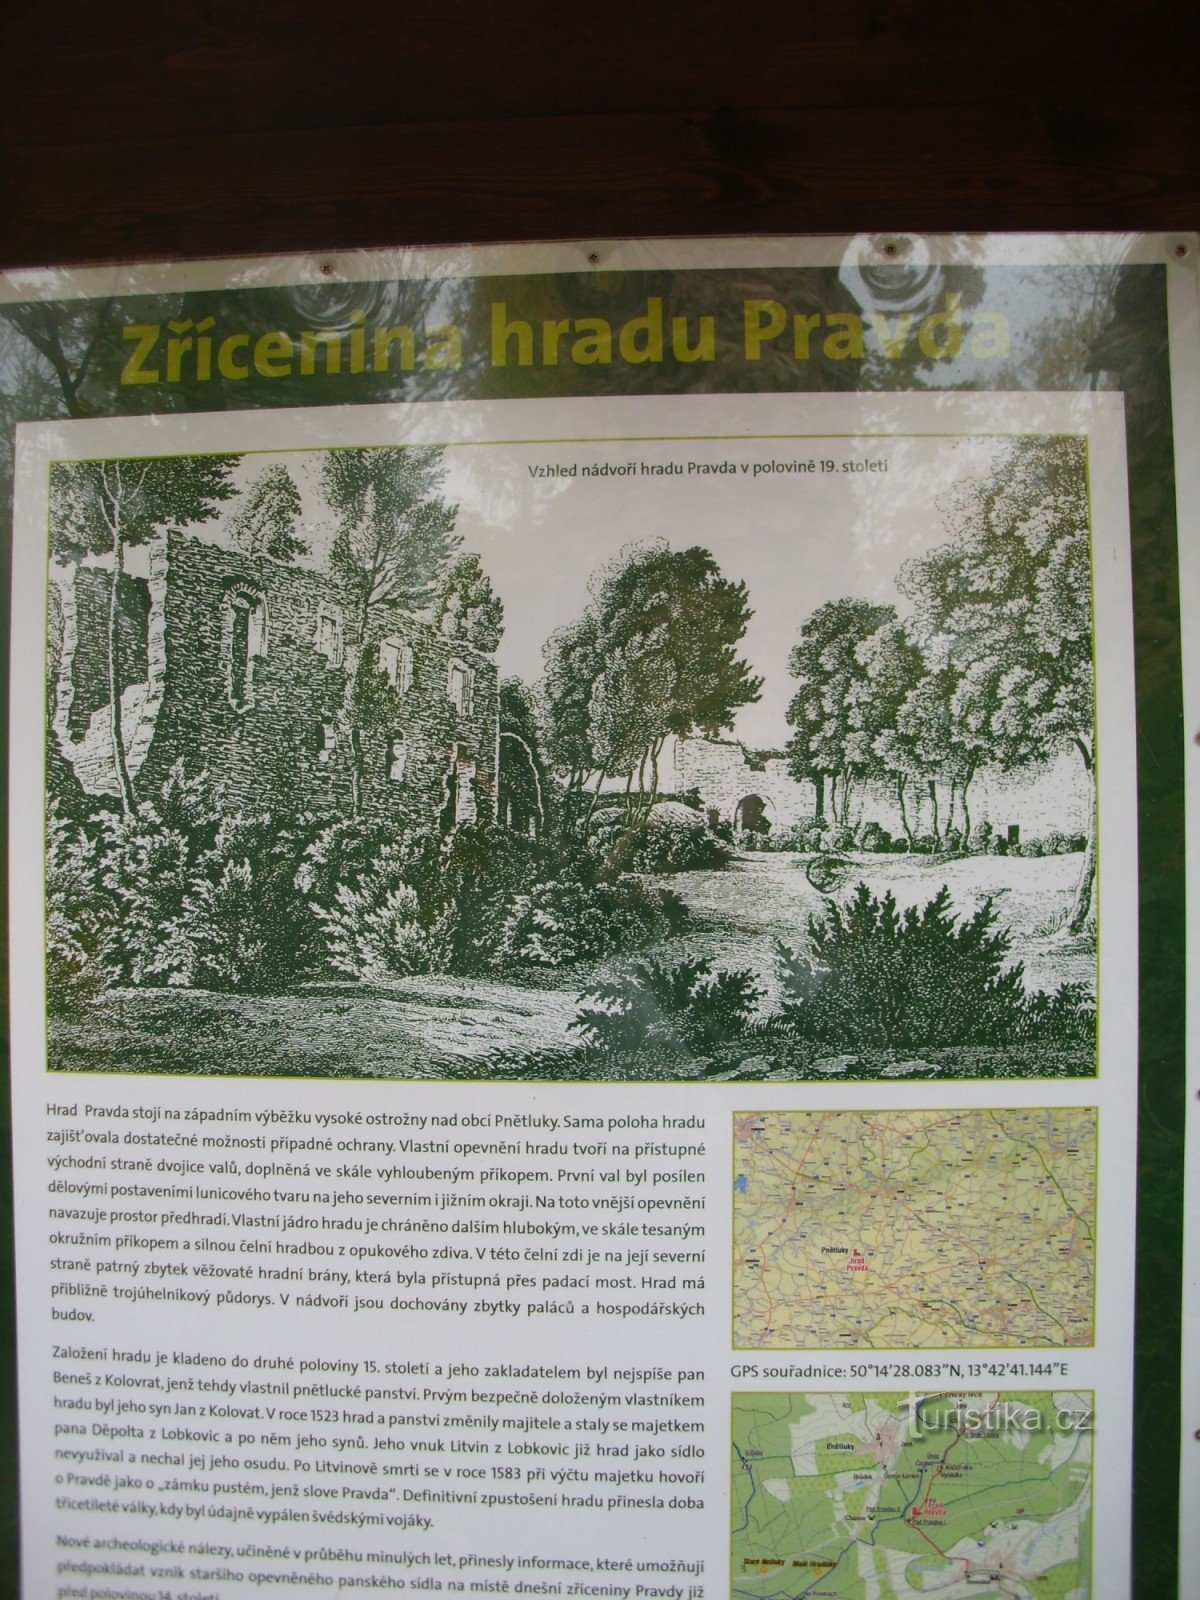 Information about the castle